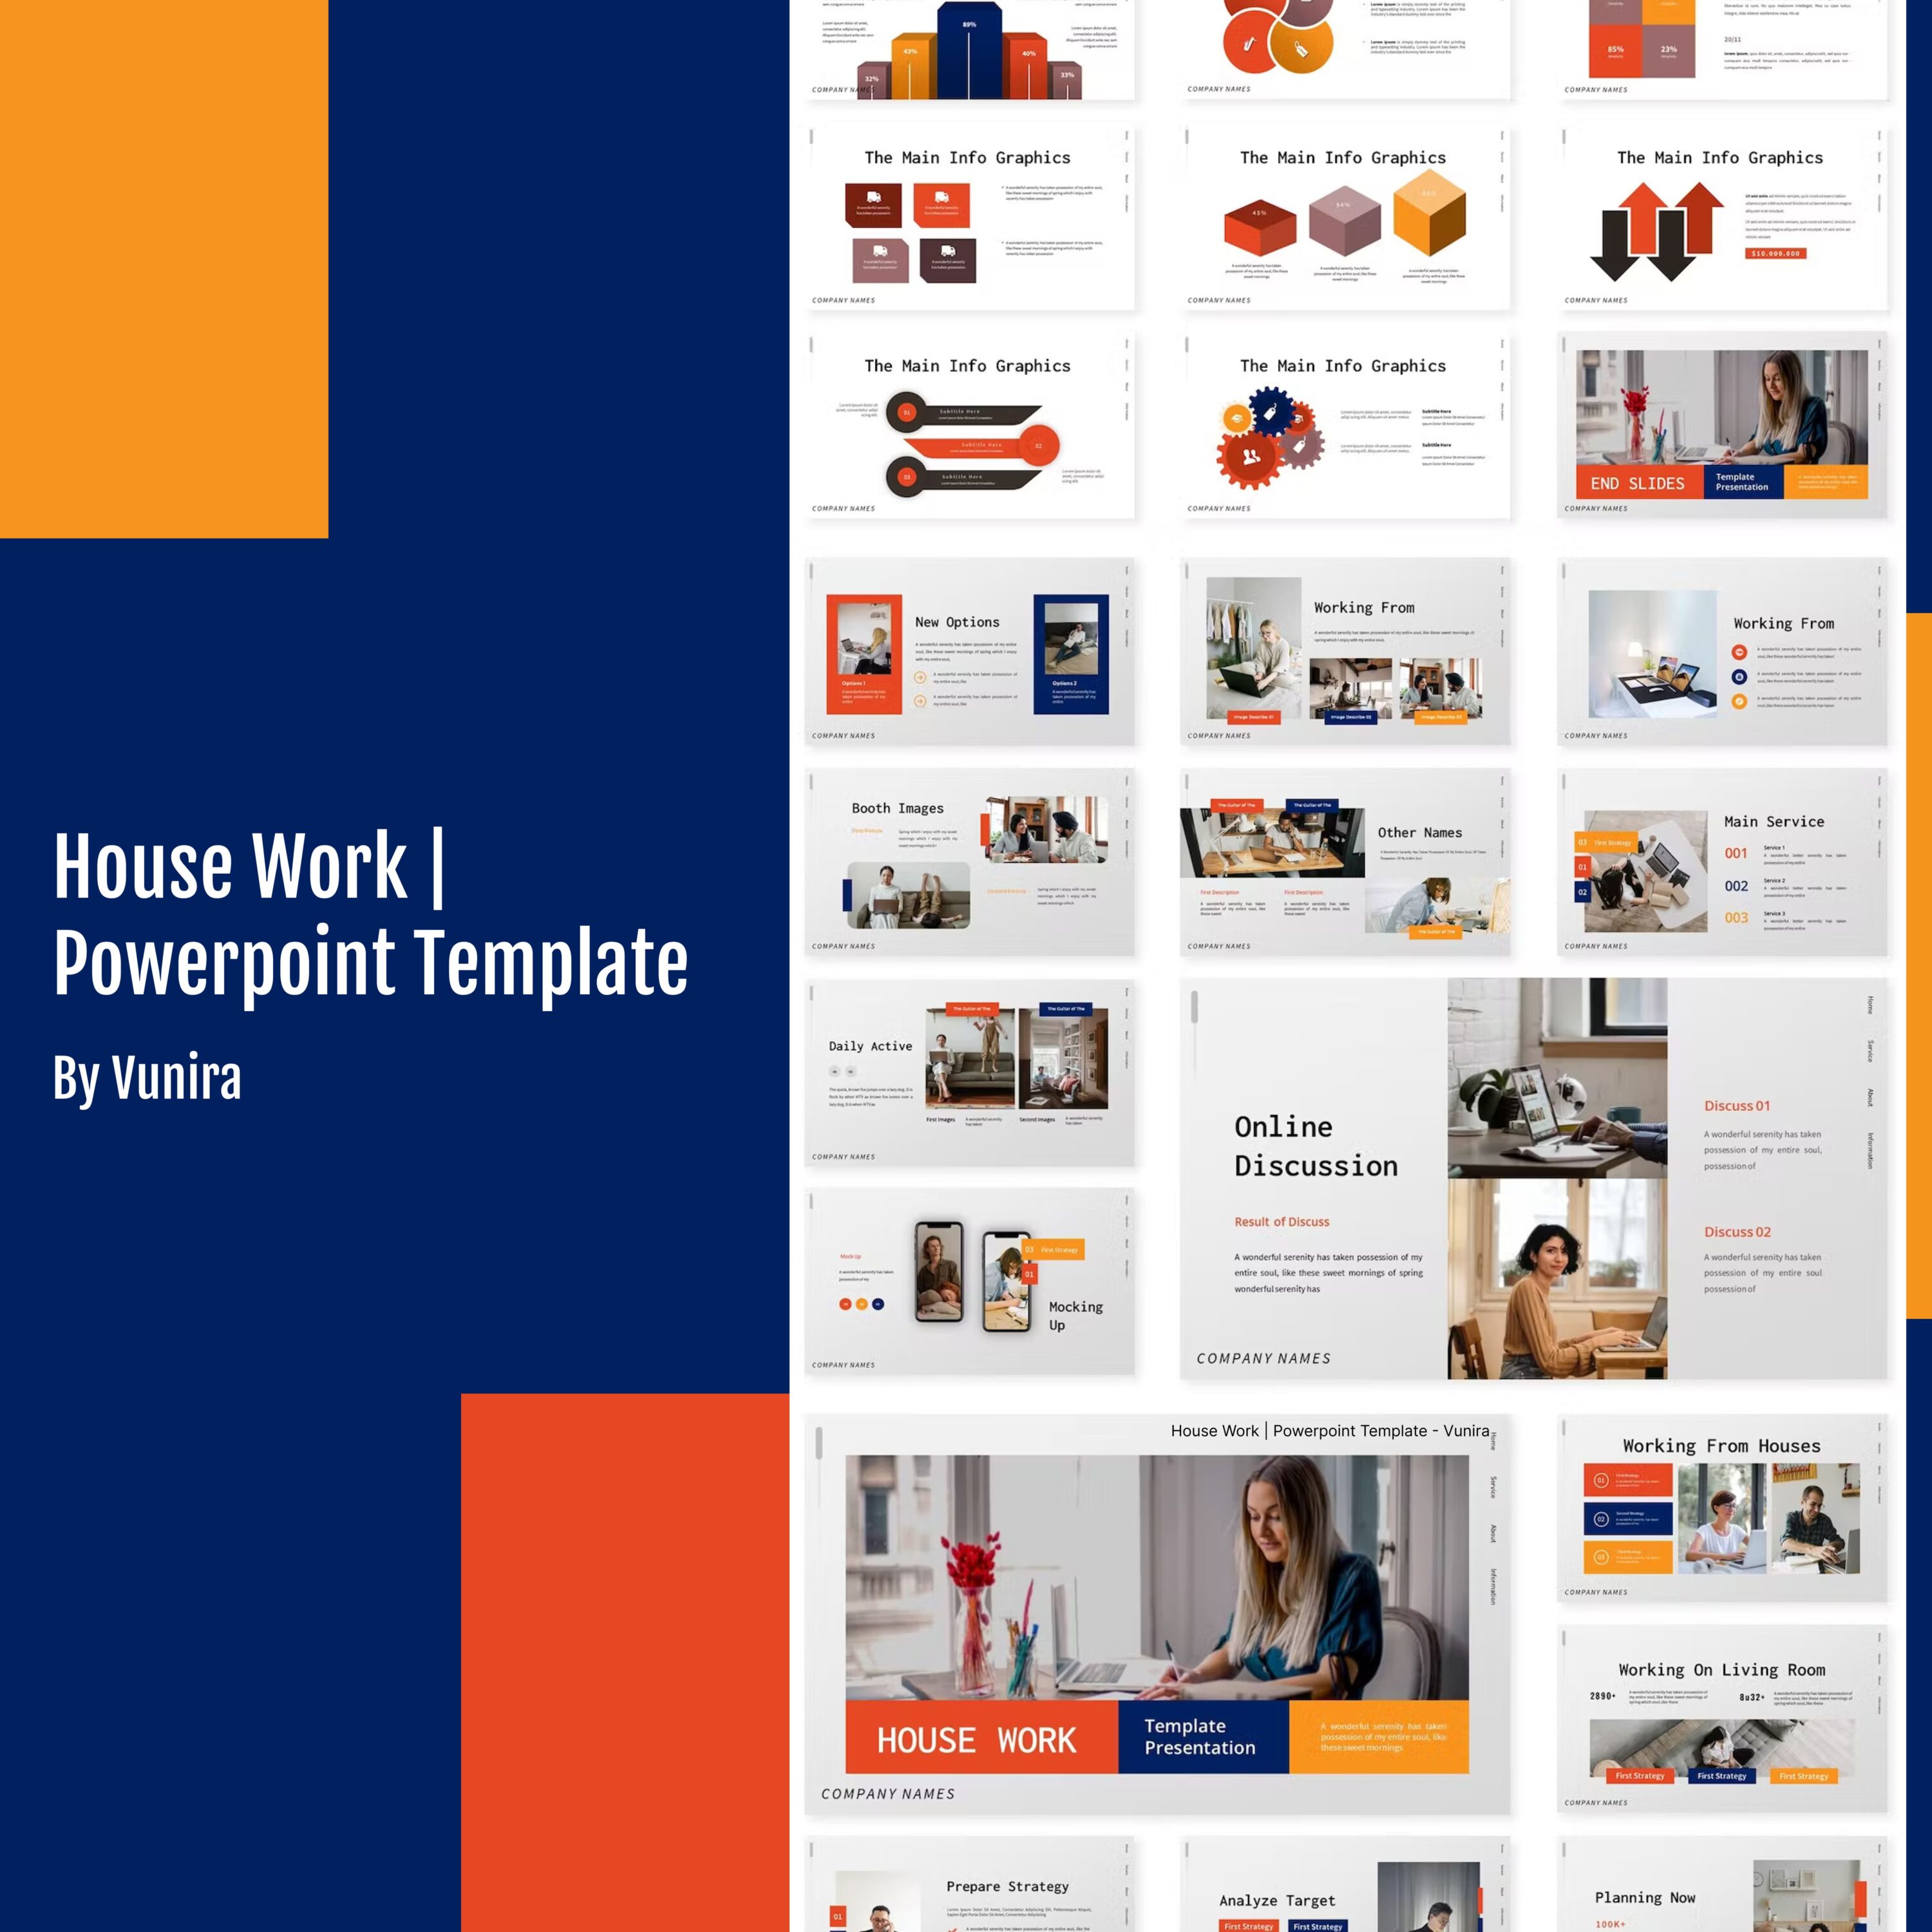 Prints of house work powerpoint template.